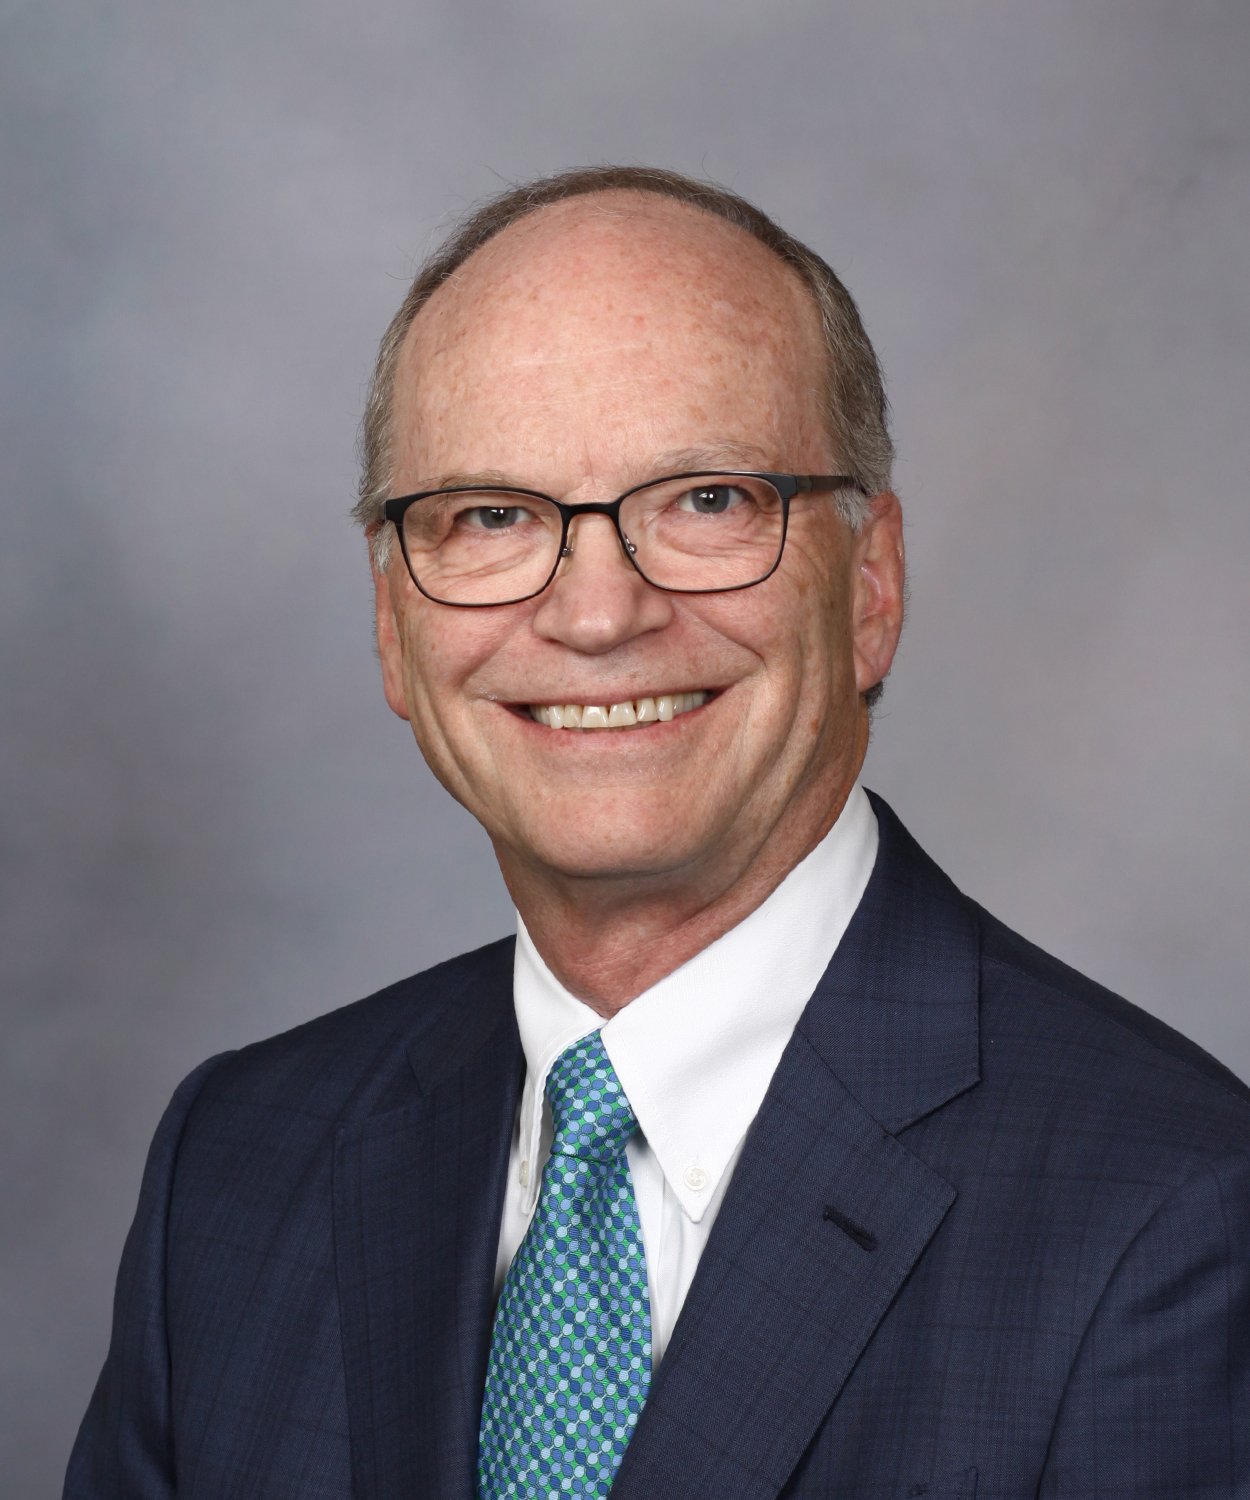 William F. Young, Jr., MD, MSc